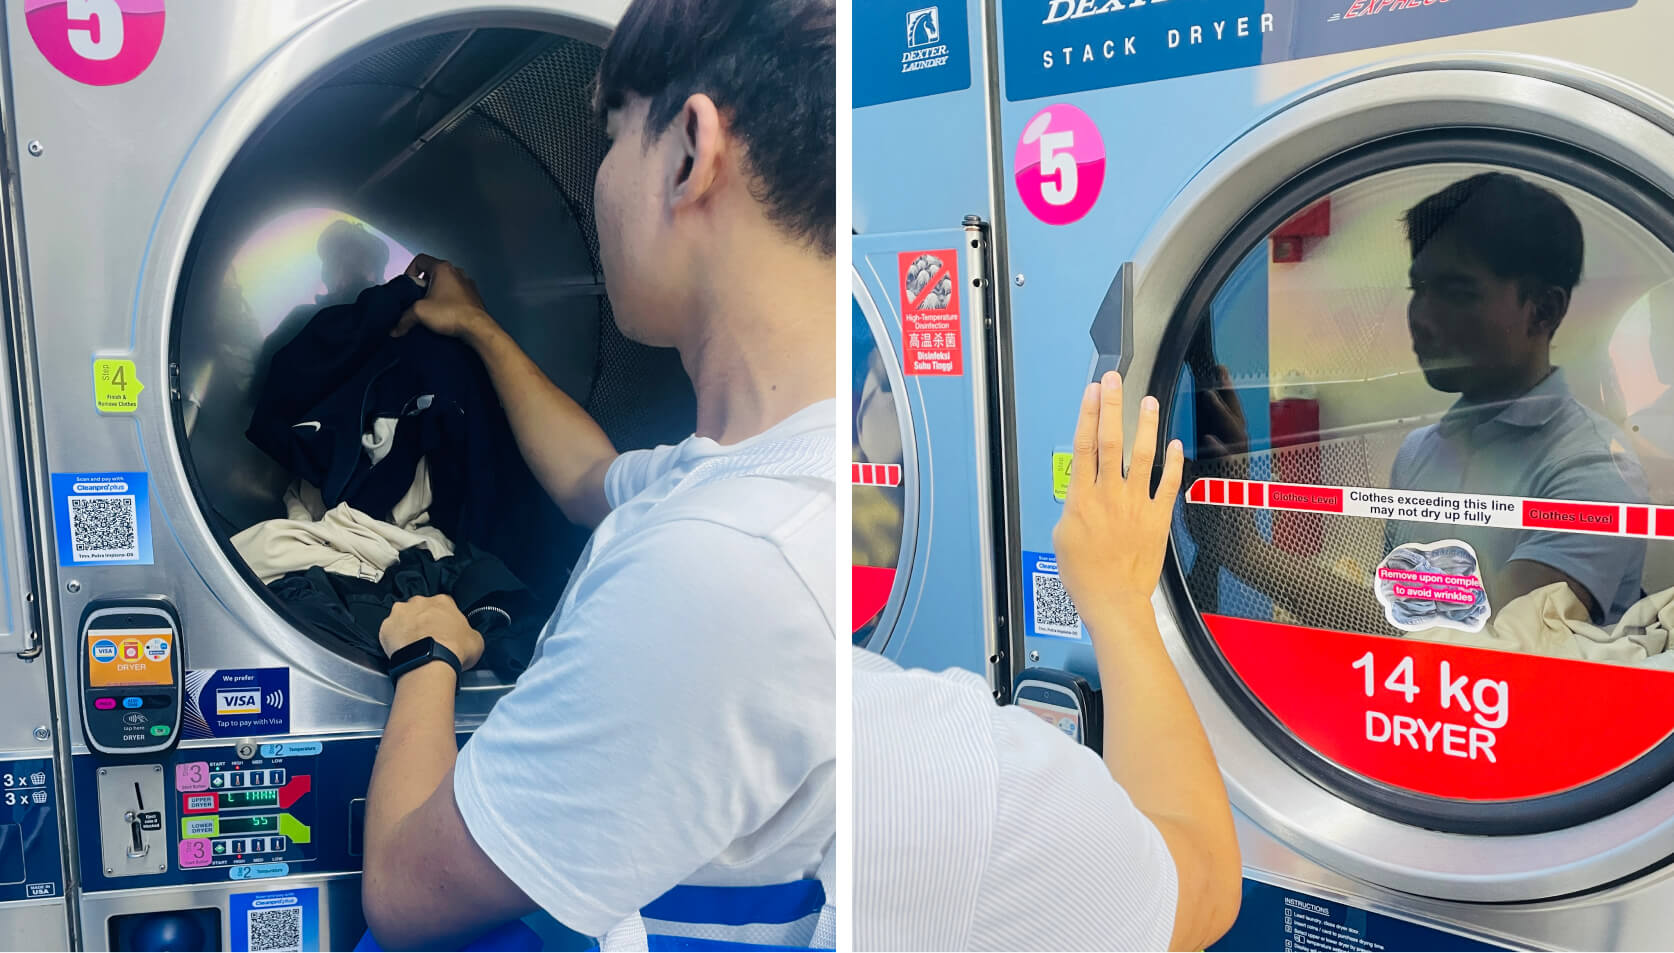 Cleanpro customer loading laundry and securely close the dryer door